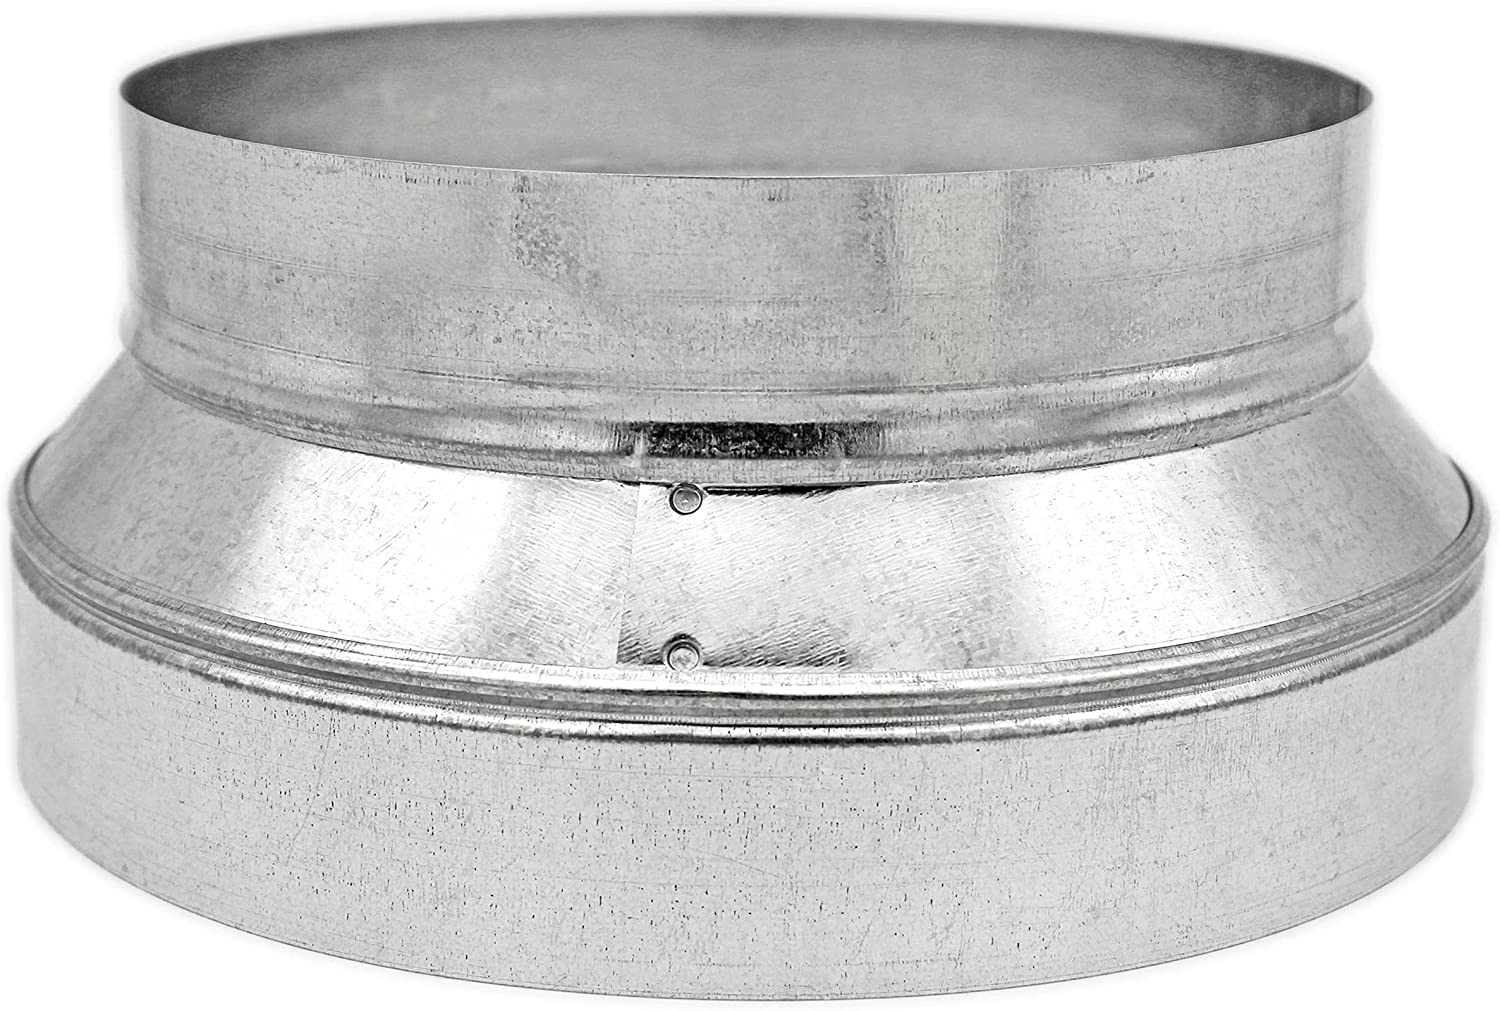 HVAC Premium Round Metal Pipe Reducer & Increaser | 14" to 10" HVAC Duct Reducer or Increaser 30g Gauge | Galvanized Sheet Metal Ducting Connector is Compatible with Duct 10"